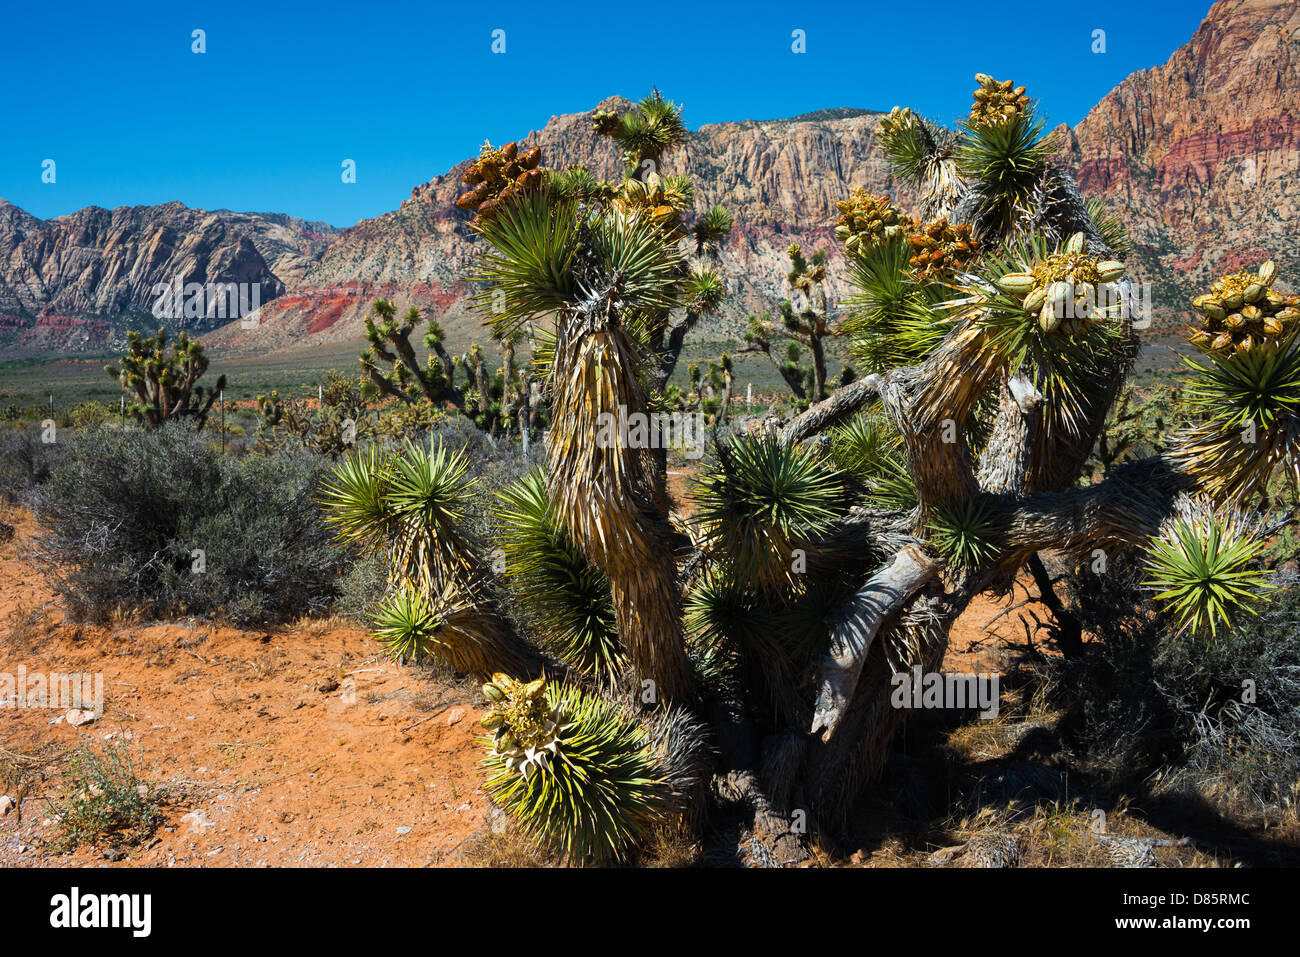 This is an image from Red Rock Canyon, California. Stock Photo